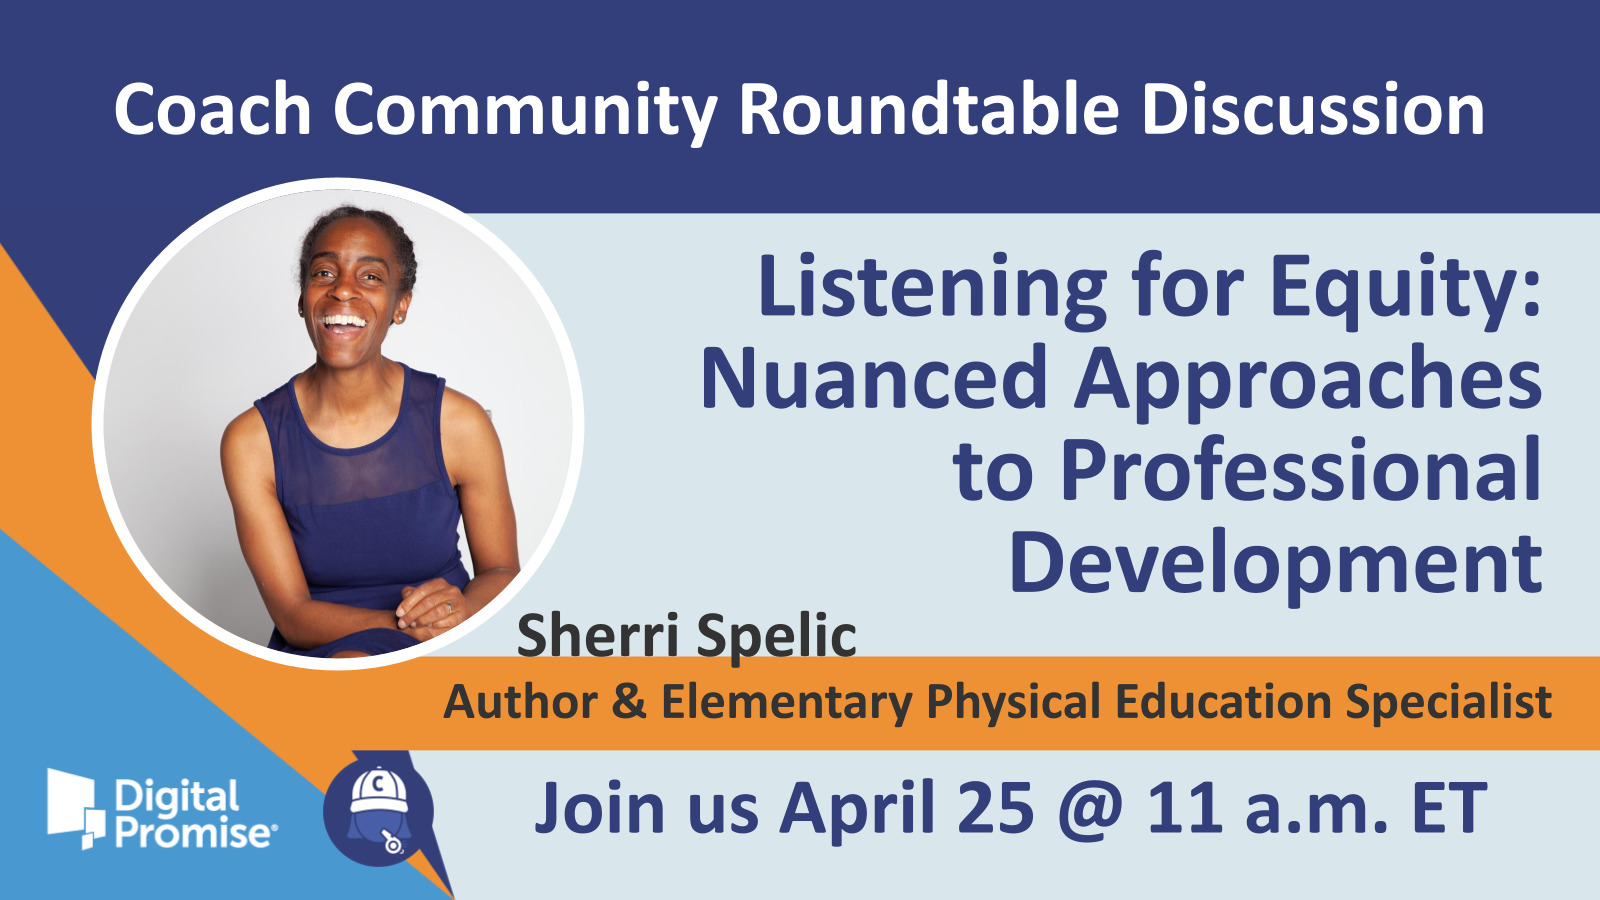 Listening for Equity: Nuanced Approaches to Professional Development on April 25 at 11 a.m. ET